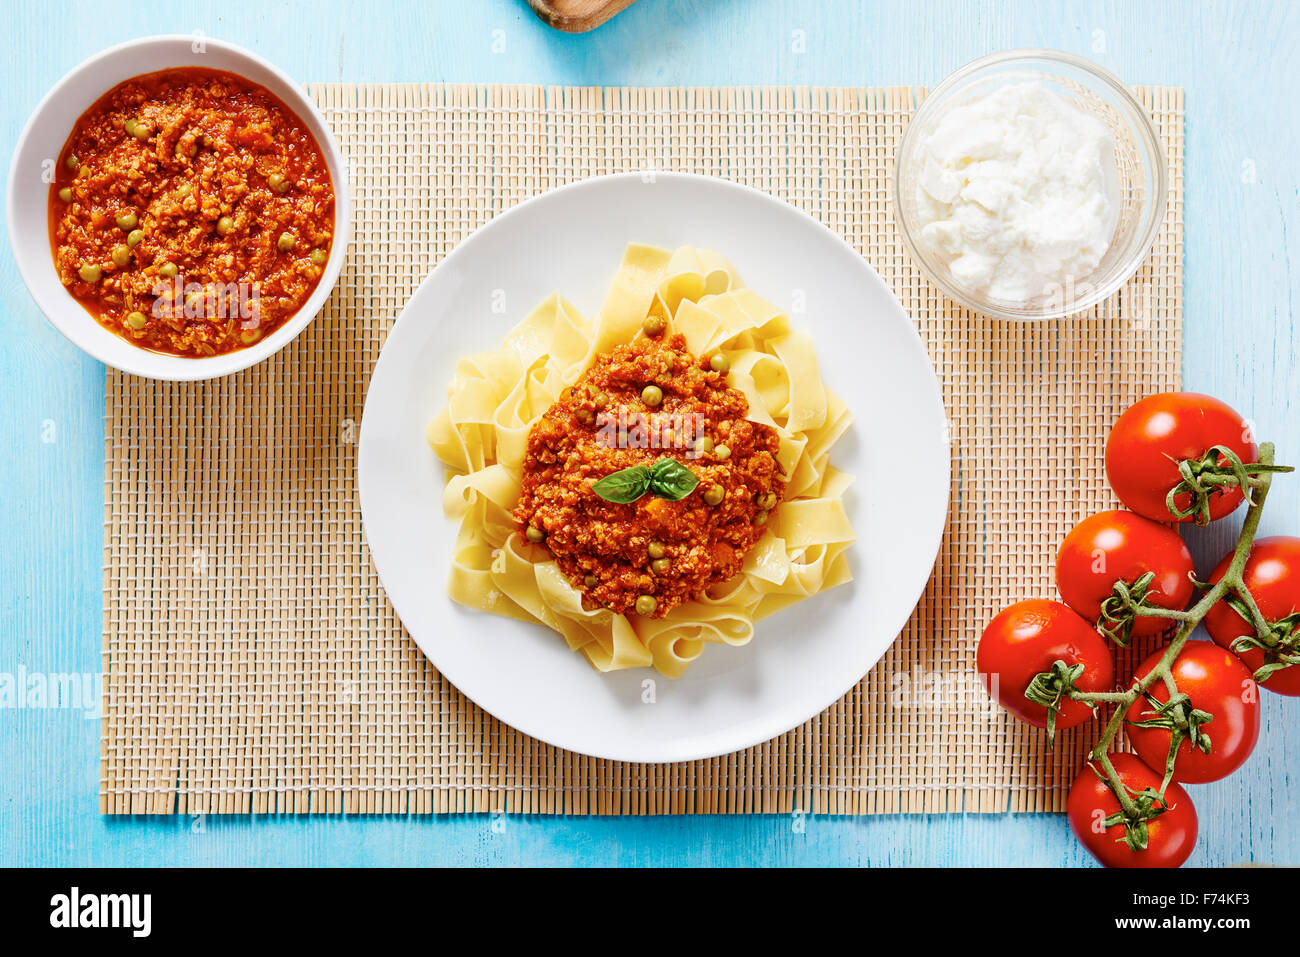 Tagliatelle with Bolognese sauce on white plate and blue wooden table Stock Photo